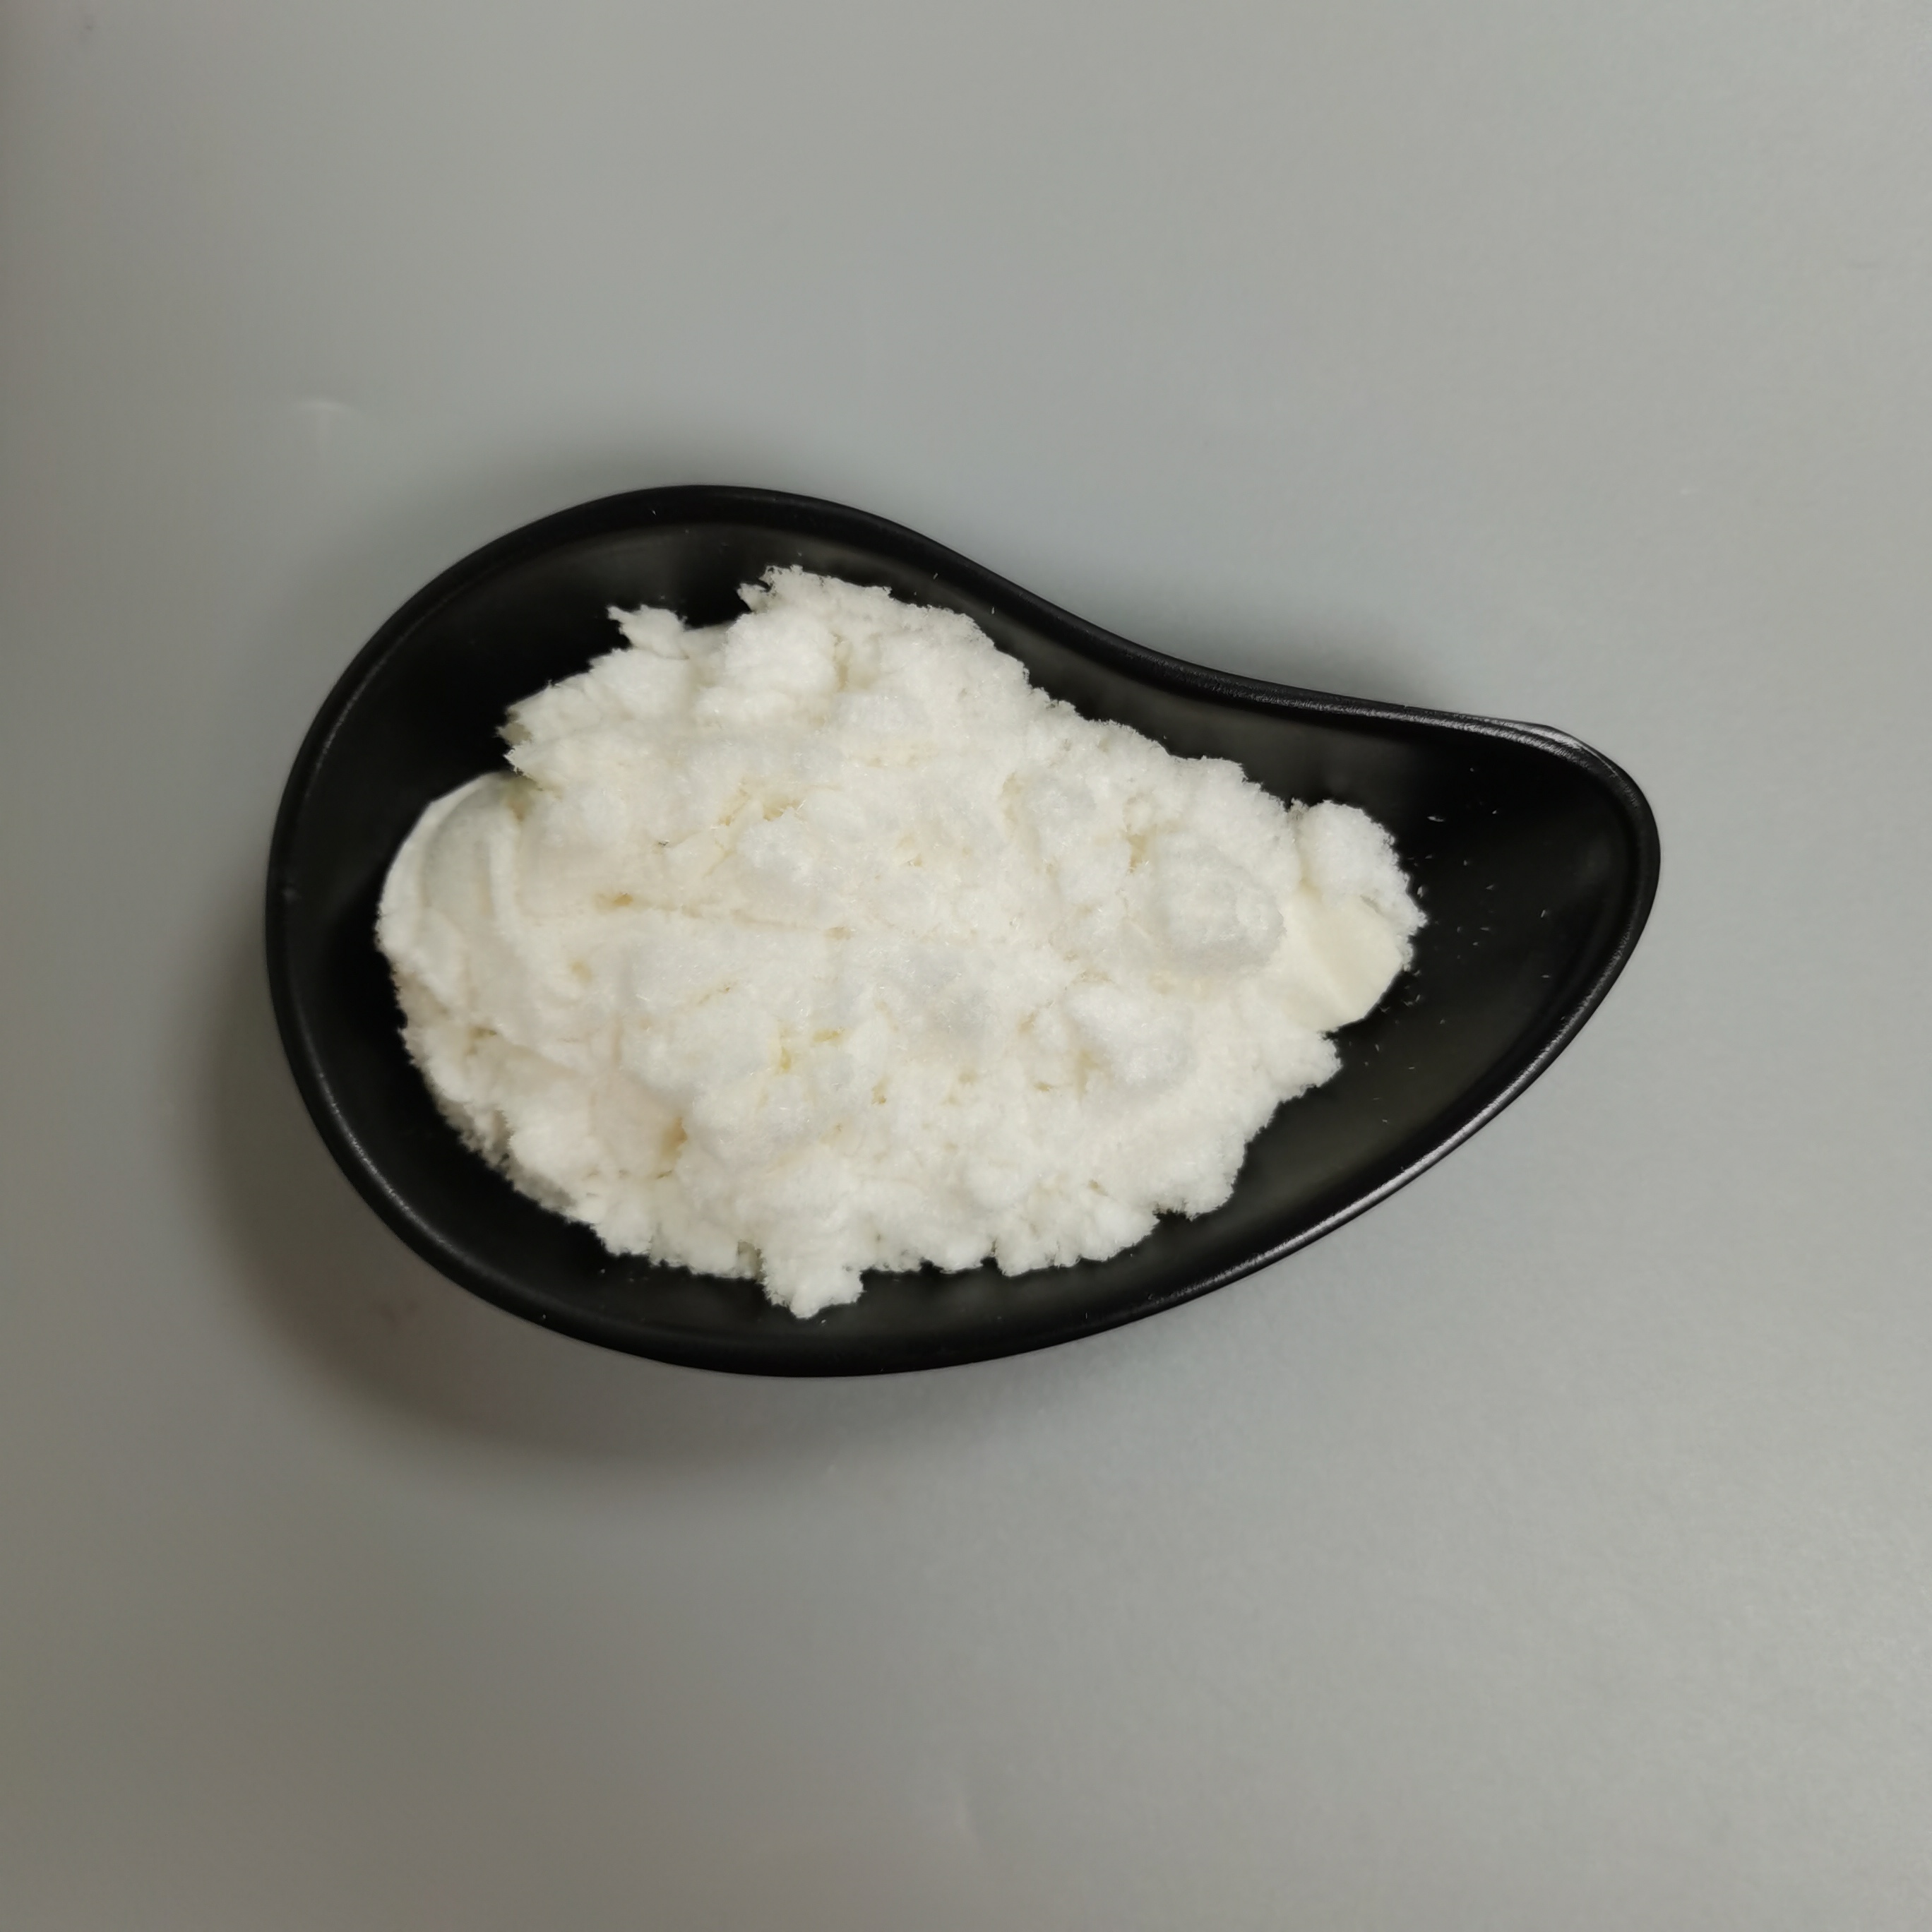 White High Quality BMK Glycidate For Research Chemical